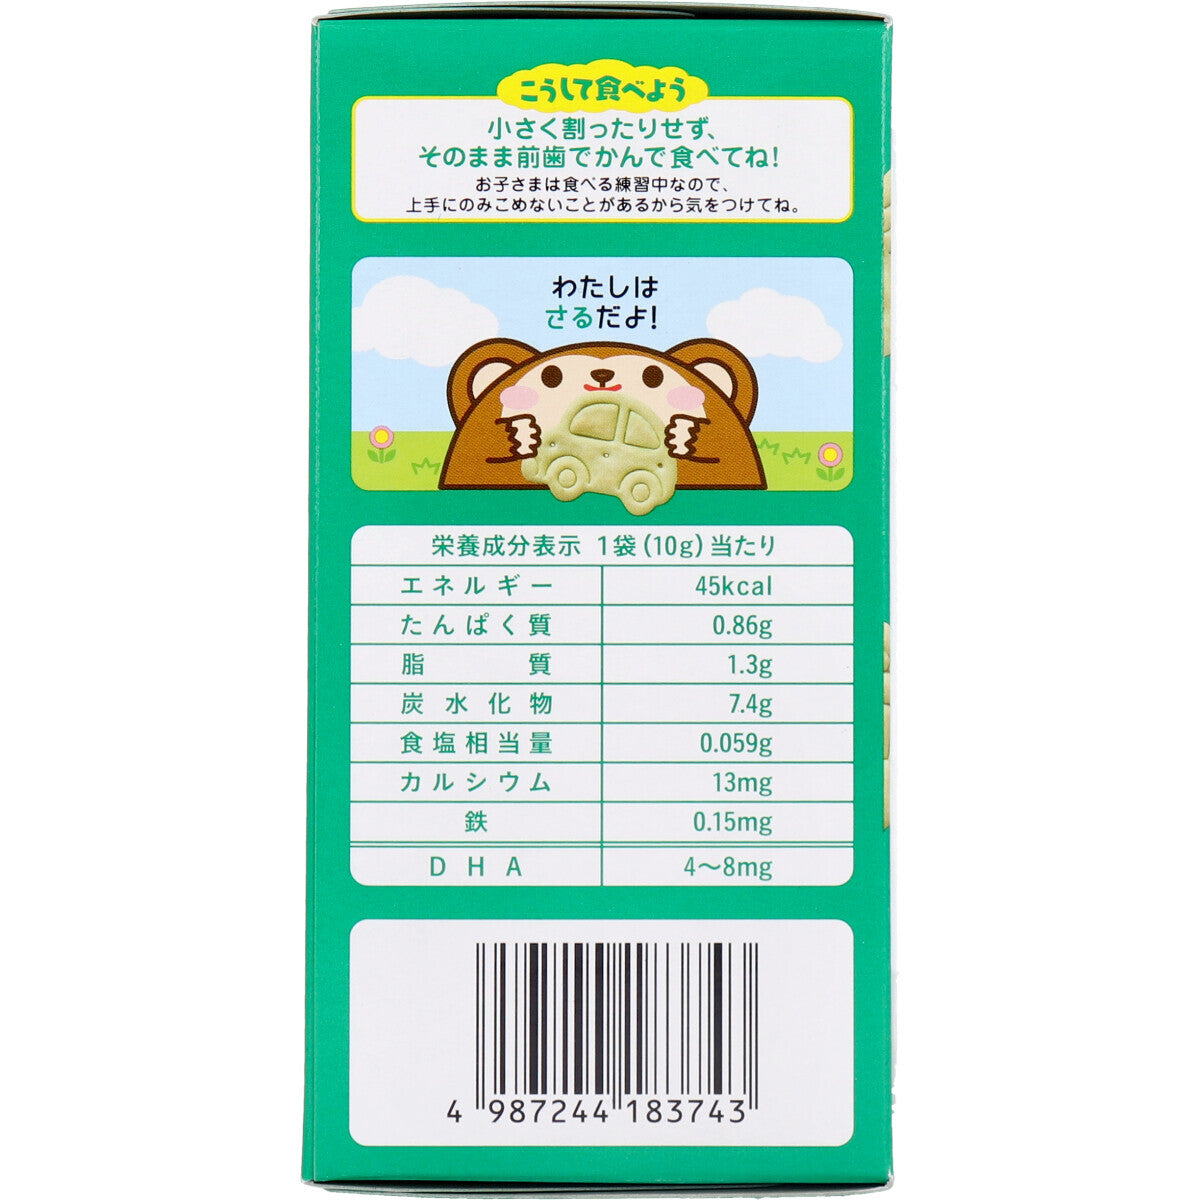 Wakodo - Baby Snacks + DHA Spinach Biscuits 10g x 3 bags